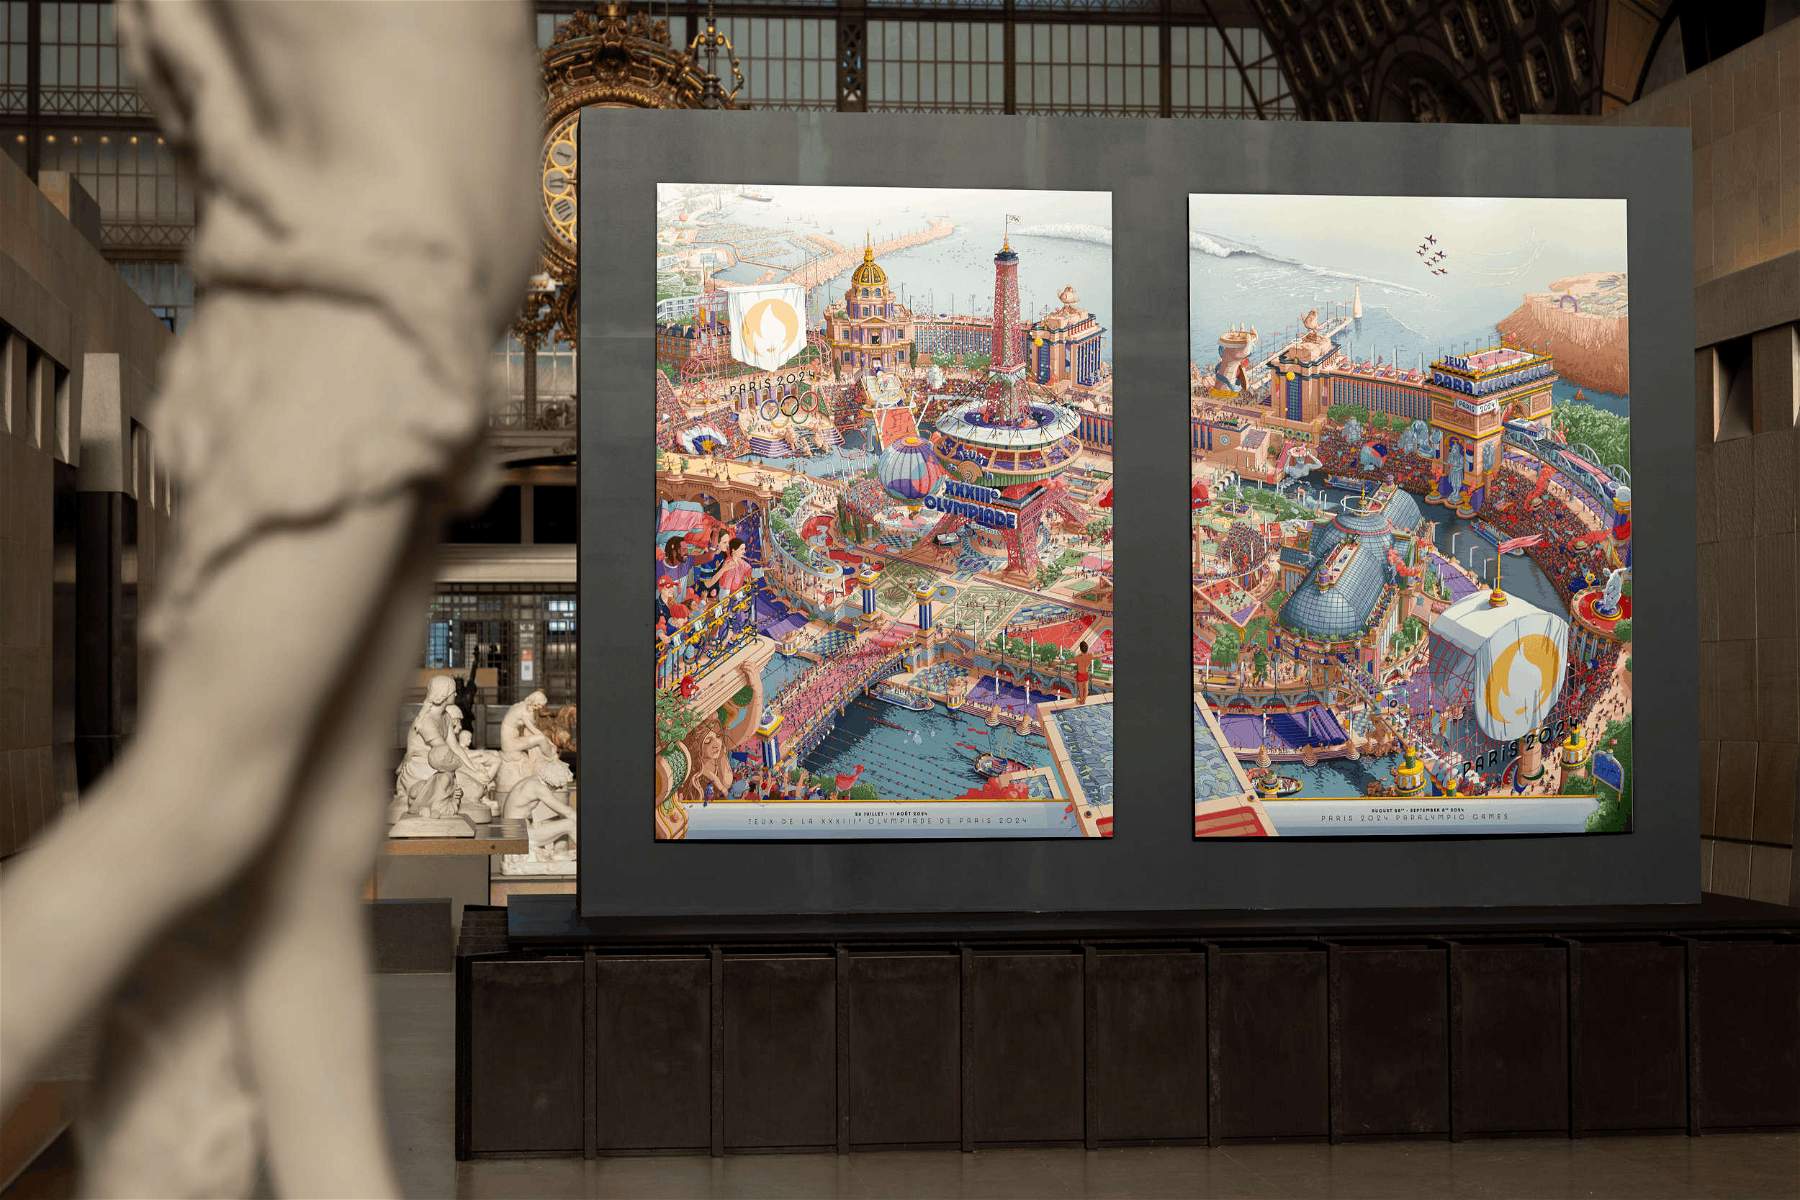 Official posters for the Paris 2024 Games presented at the MusÃ©e d'Orsay